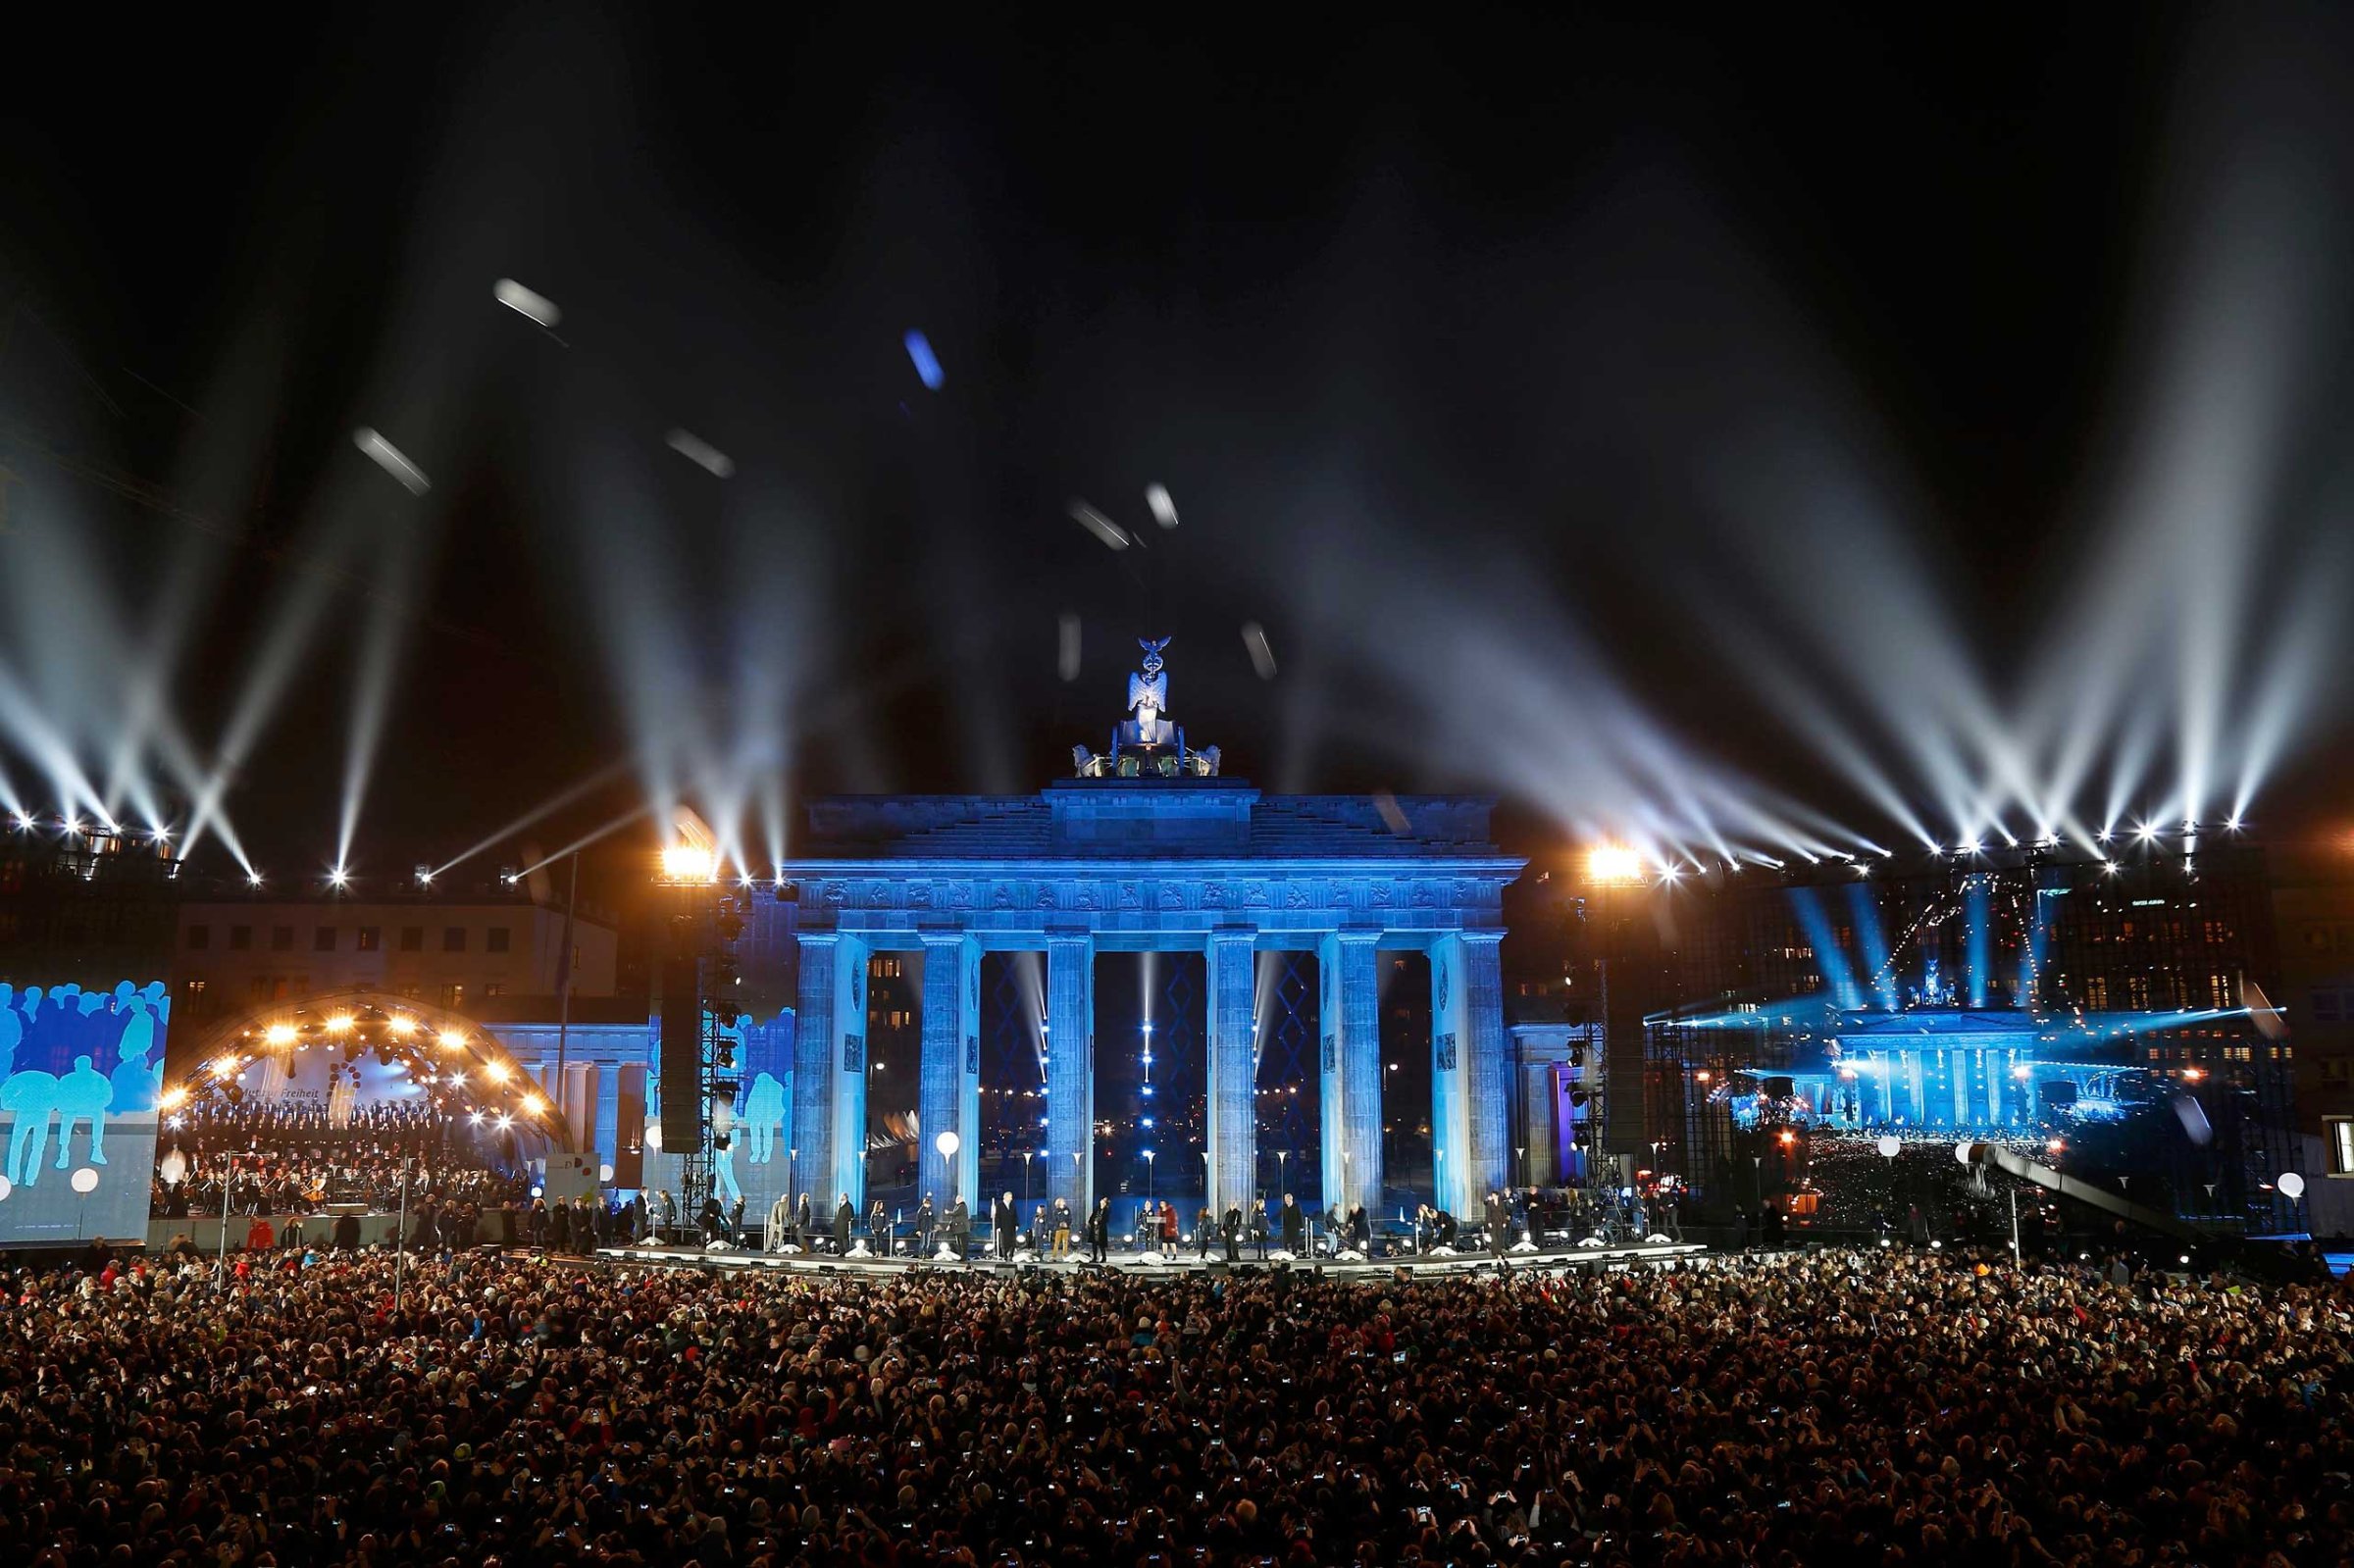 Balloons which were part of the installation 'Lichtgrenze' (Border of Light) are released in front of the Brandenburg Gate in Berlin